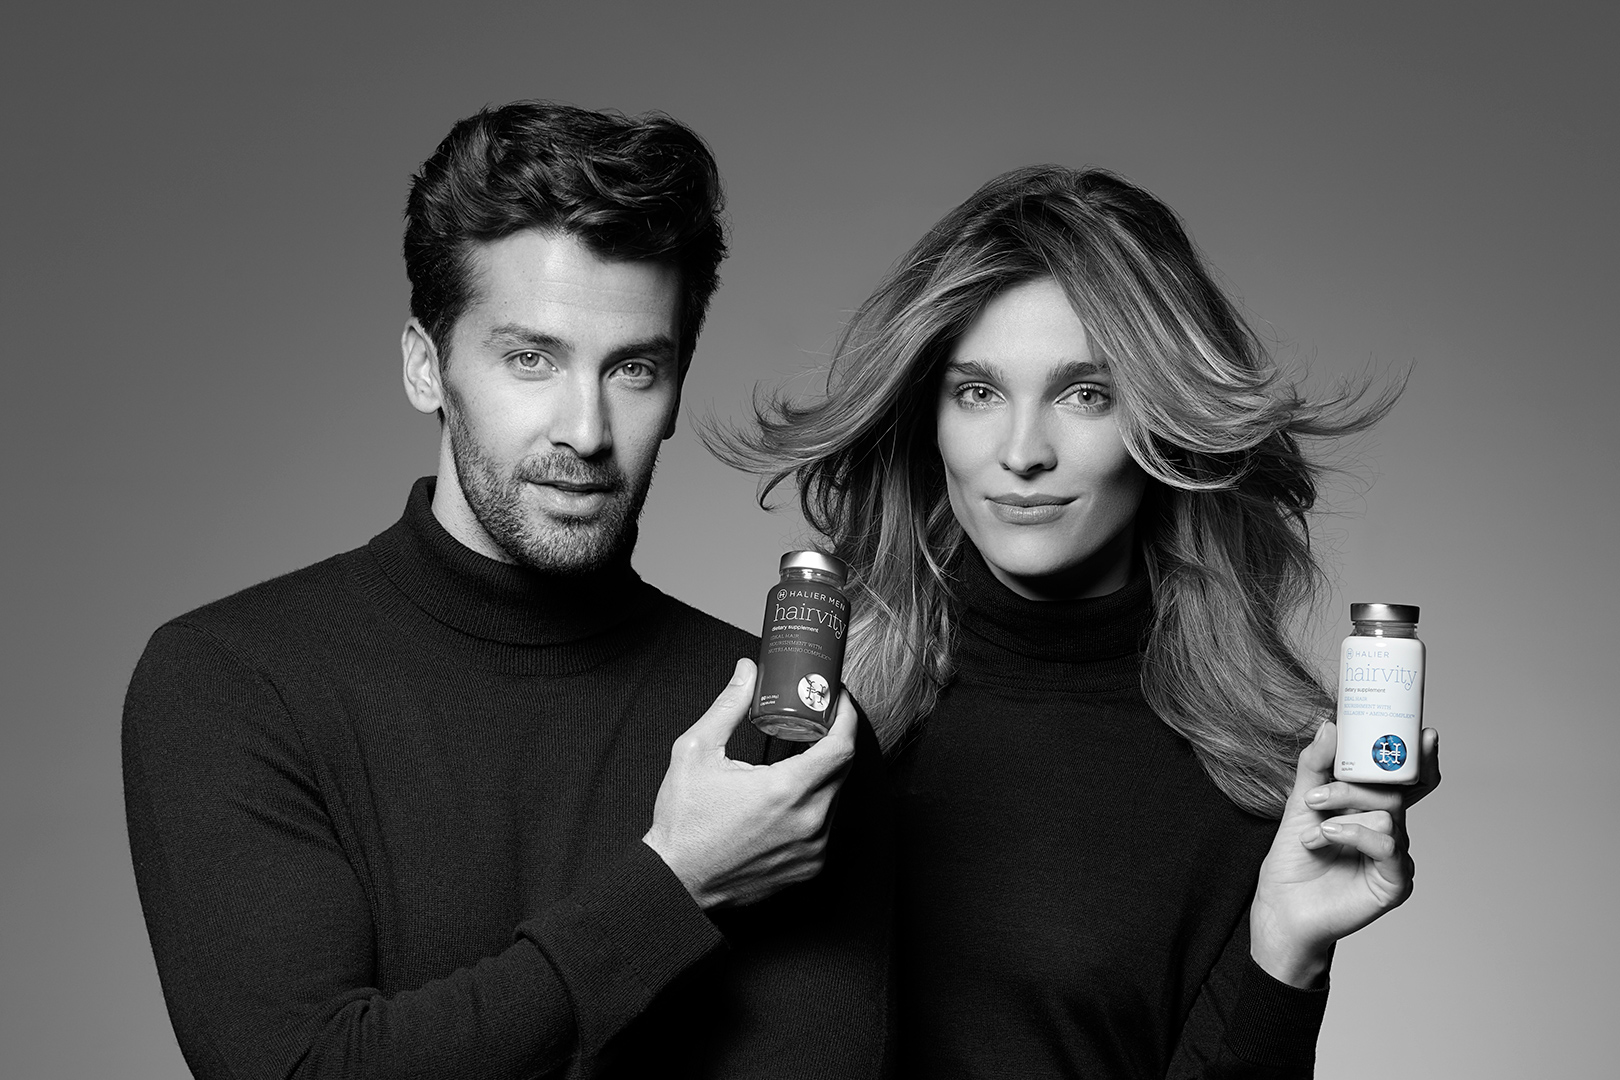 Black and white promotional image featuring a man and a woman in black turtlenecks, each holding a bottle of Hairvity hair care supplements. They both have confident, approachable smiles, and their healthy hair complements the product they're endorsing